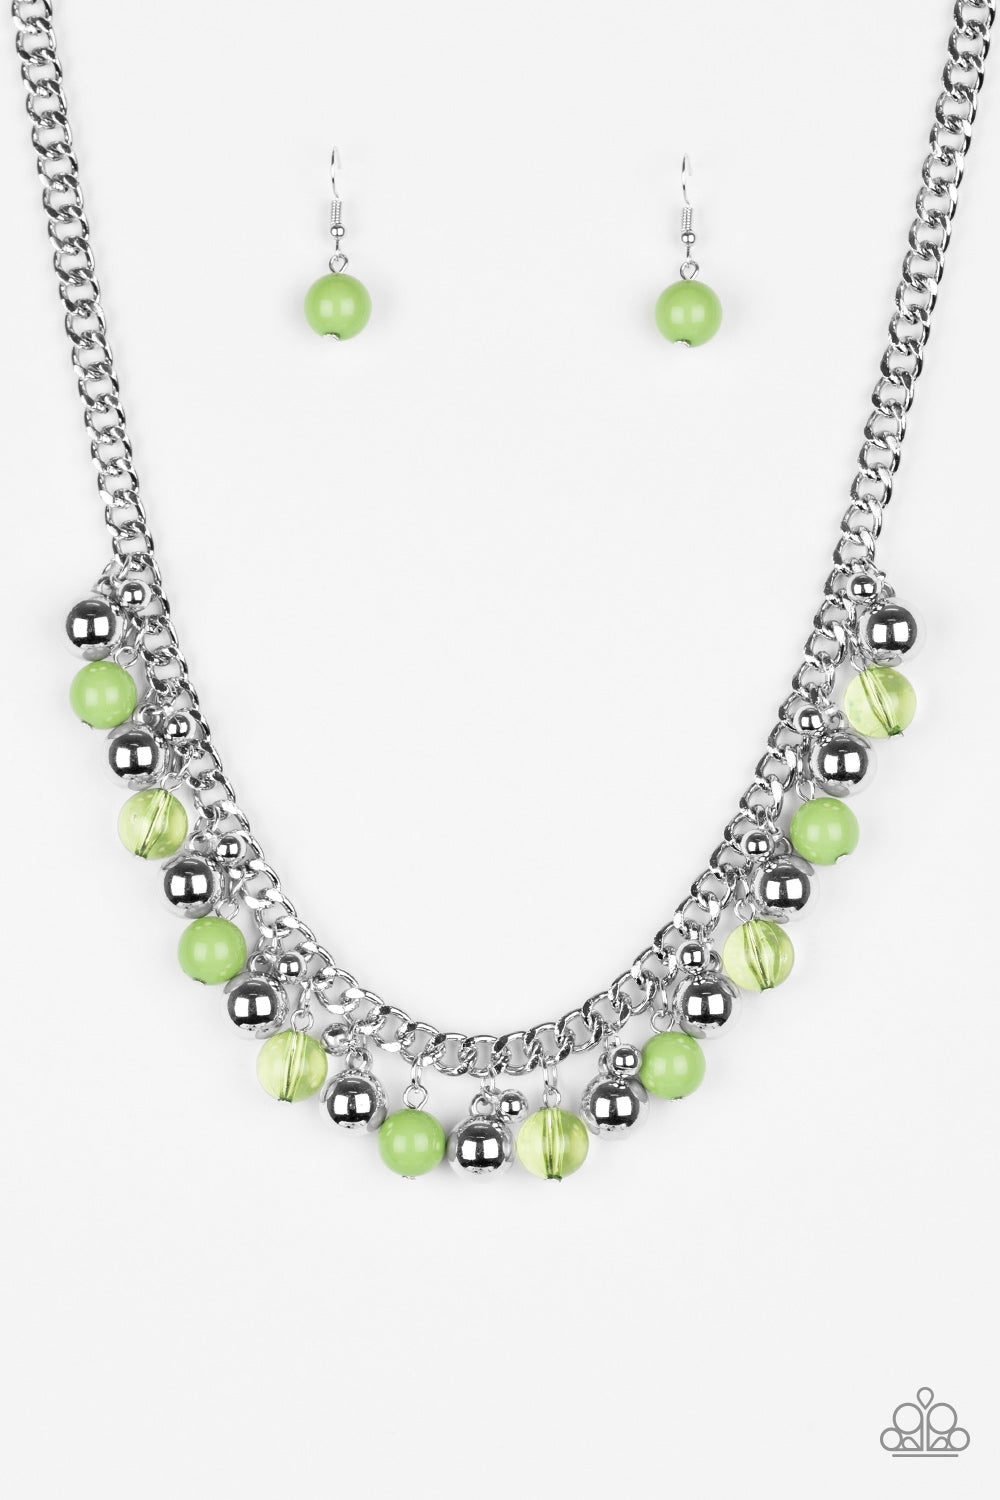 Keep A GLOW Profile - Green Necklace